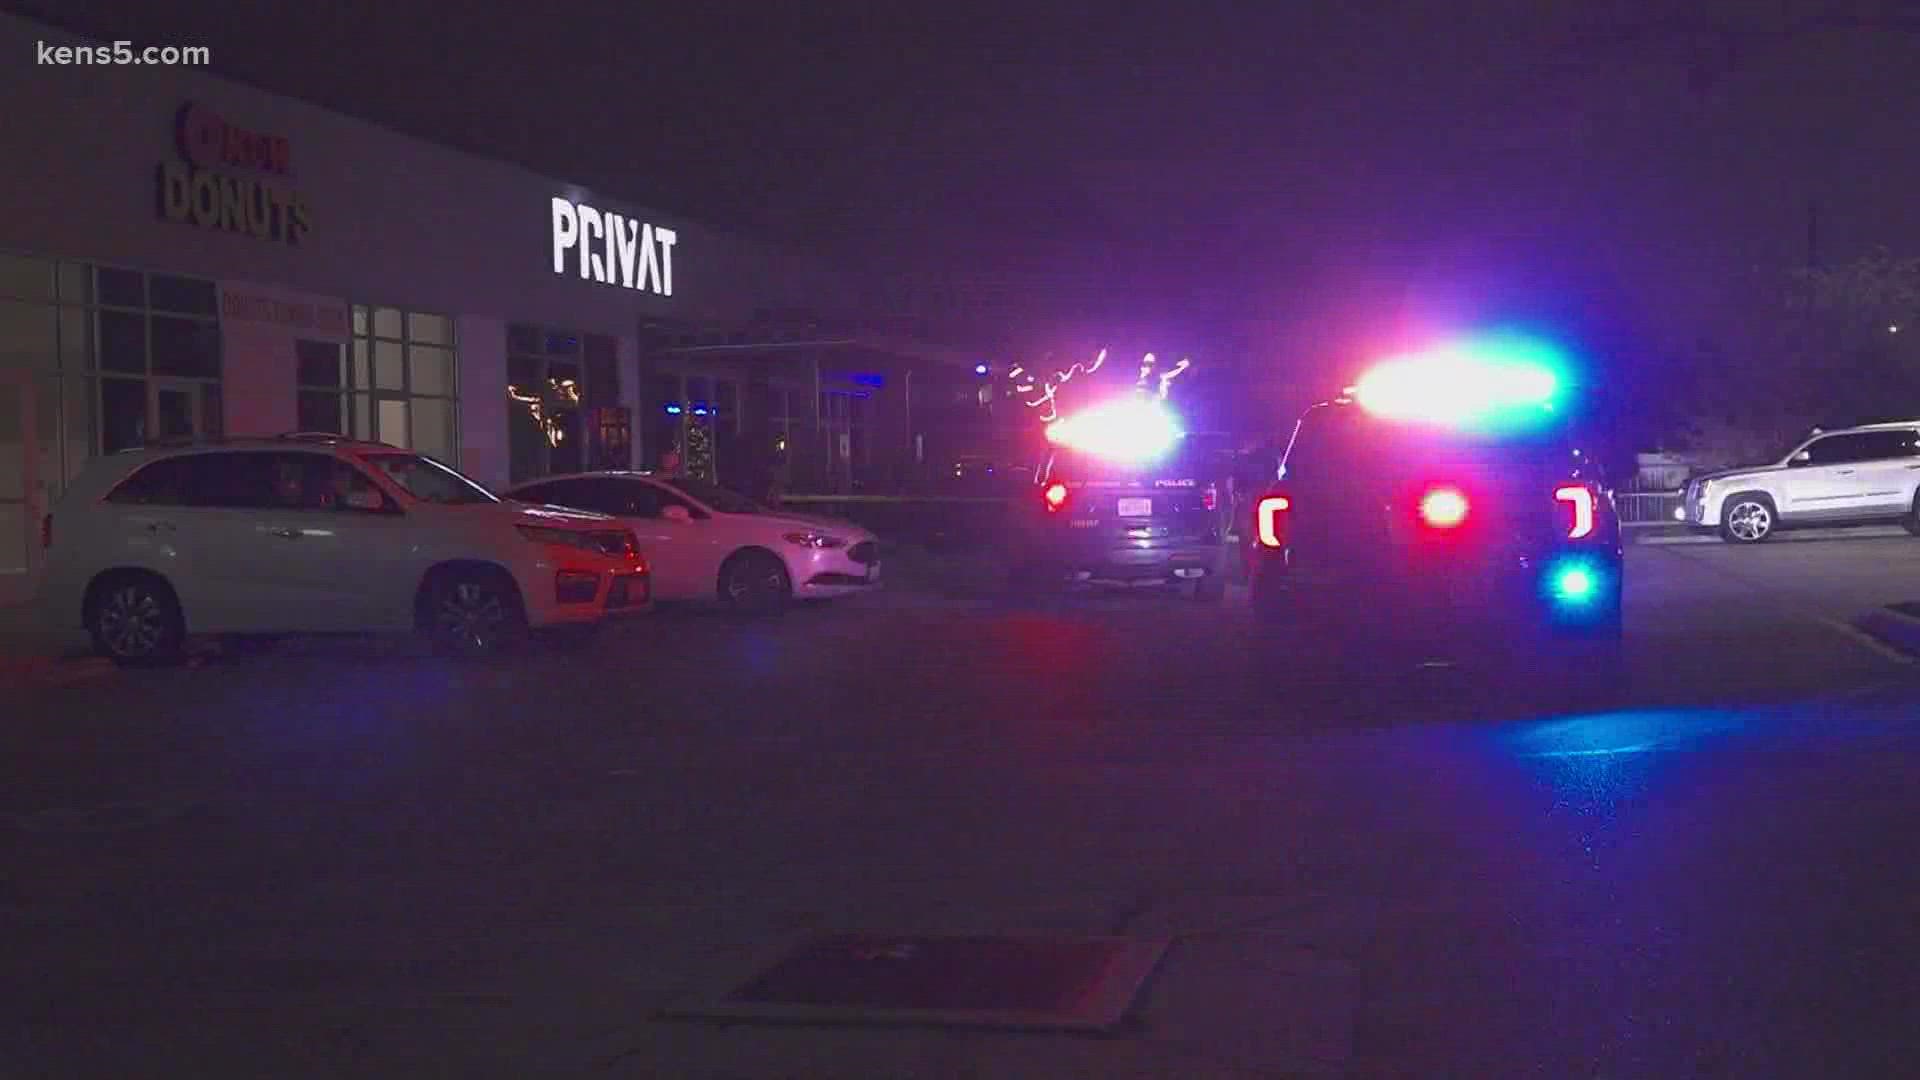 Police said the 22-year-old is in critical condition after leaving Privat Bar, located on UTSA Boulevard and Vance Jackson Road.